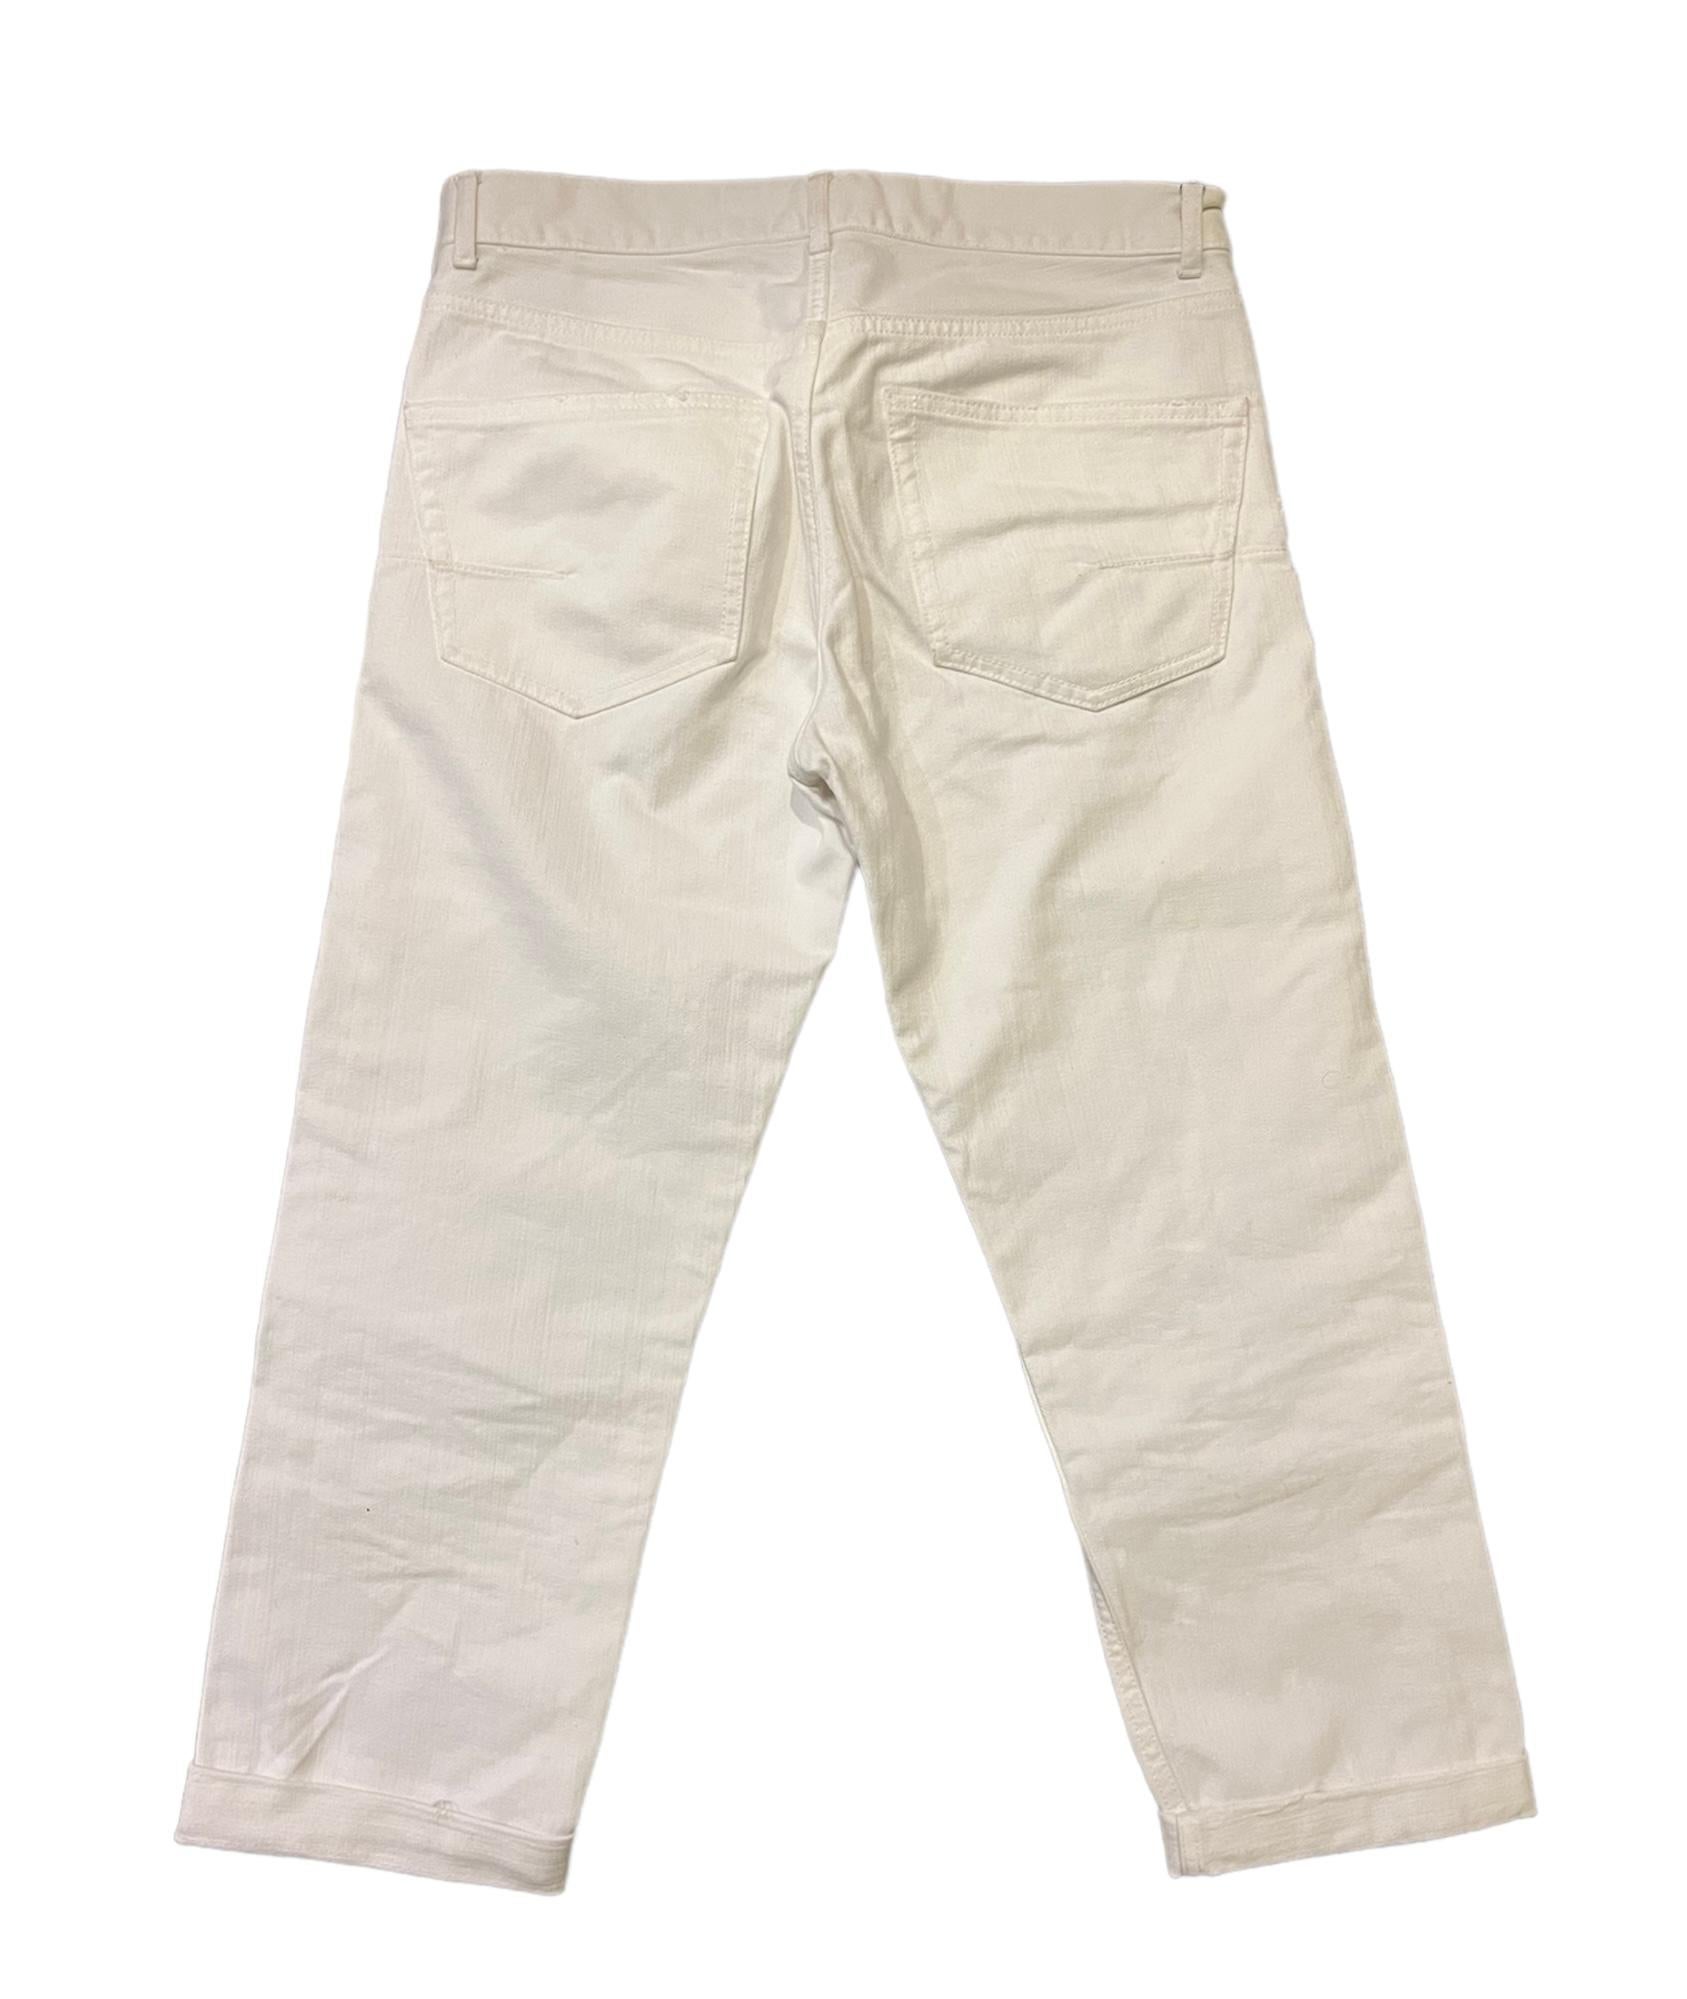 Christian Dior White Pant Jeans, Size 36 For Sale 1